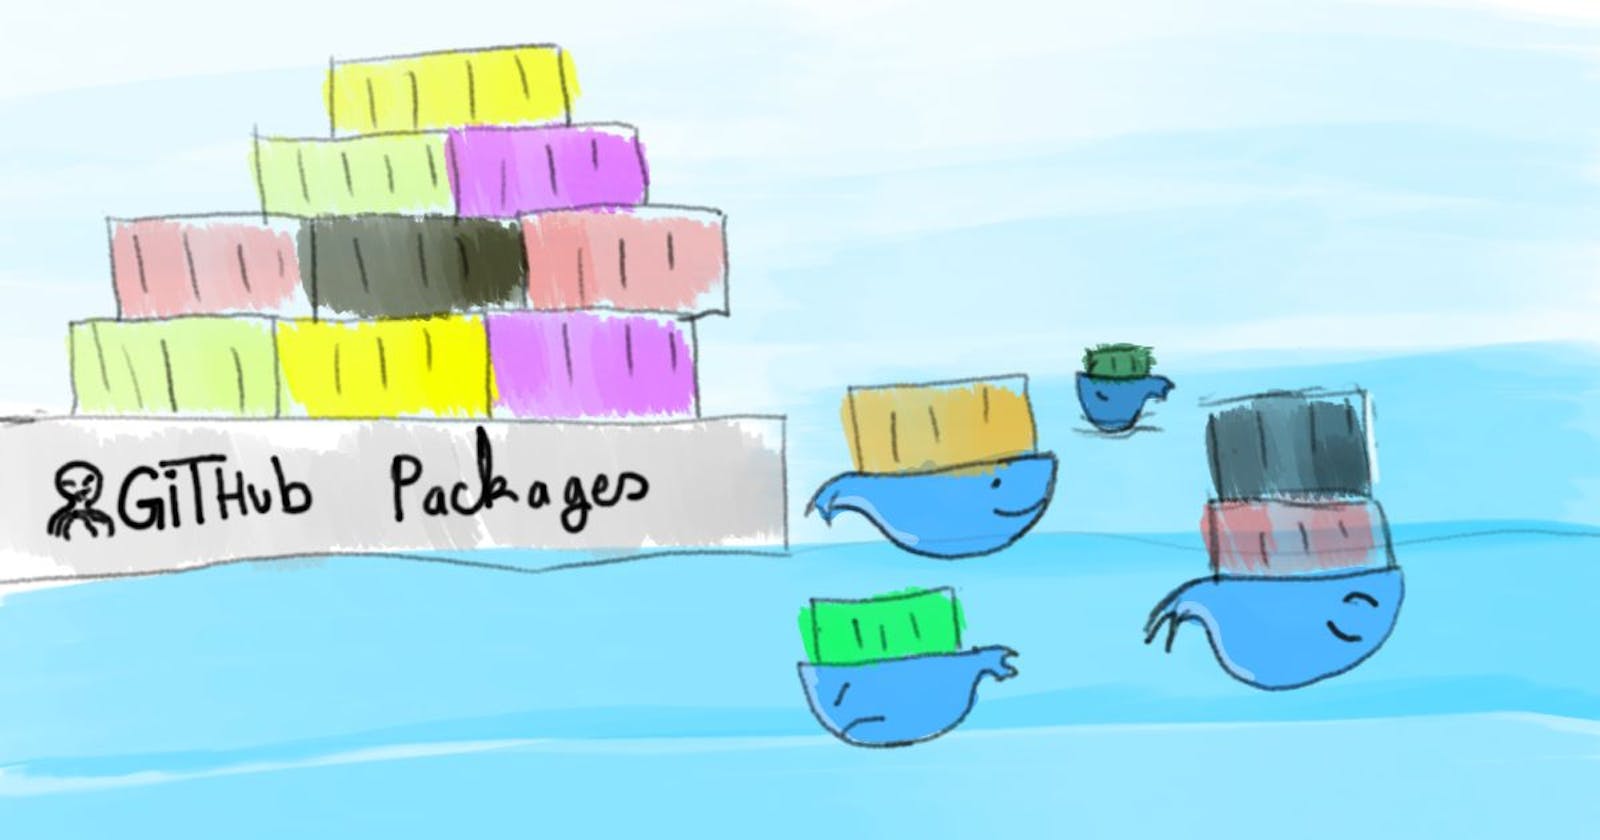 How to create a docker image and host it on Github Packages